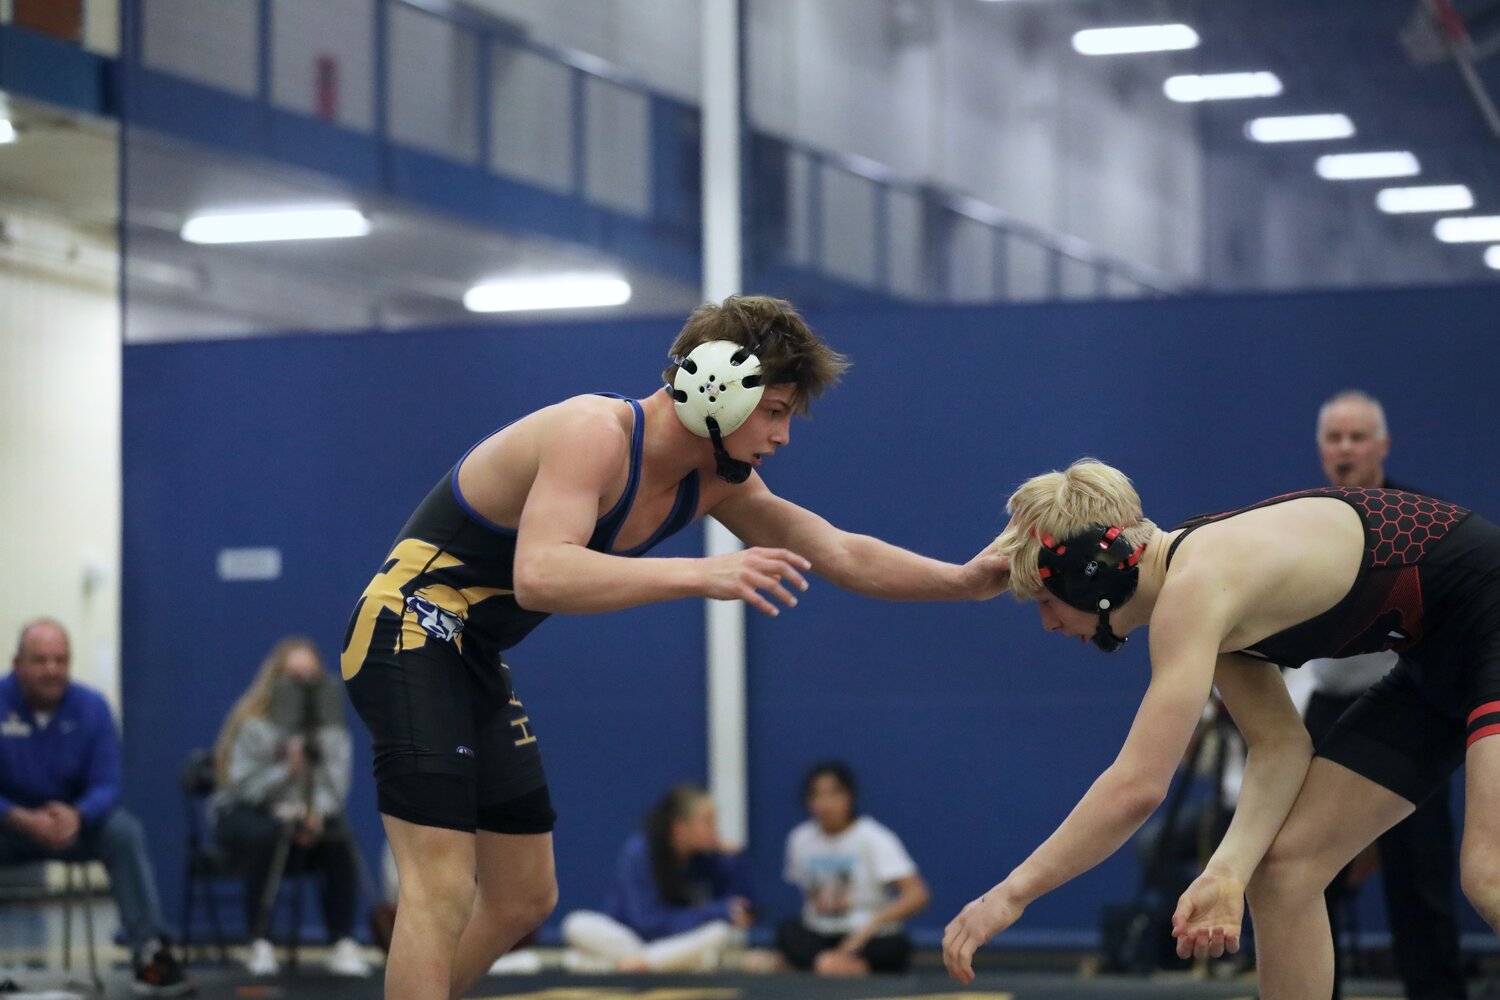 Trey Beisell continued to have an outstanding season, beating his state-ranked Shakopee opponent in a home meet Thursday, Feb. 1.